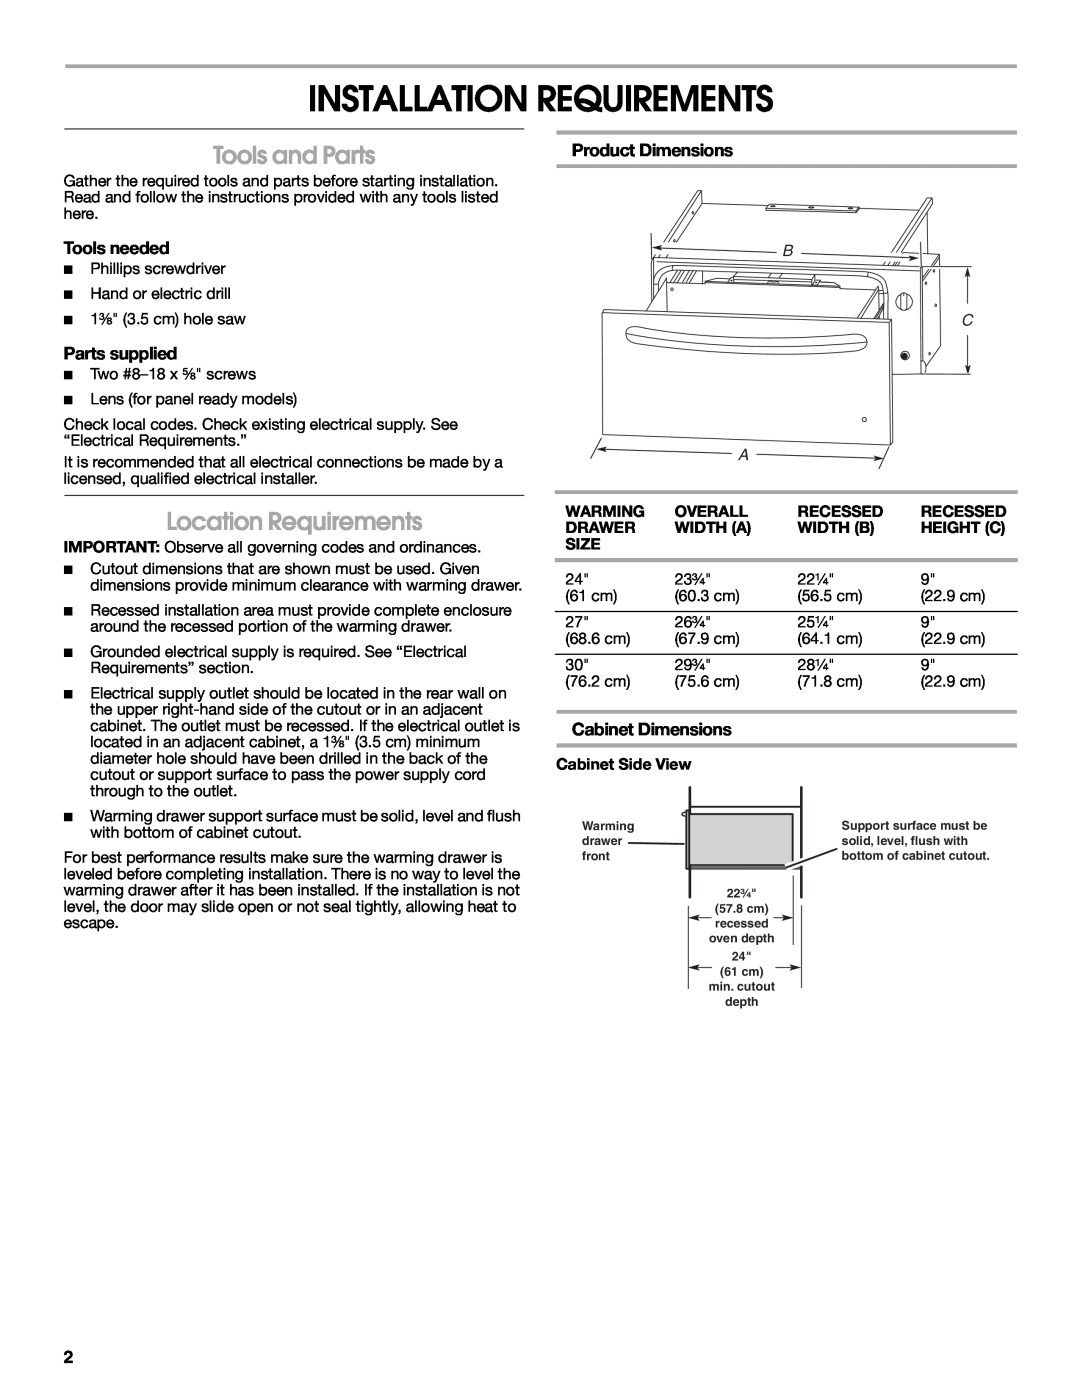 Whirlpool 9763140B Installation Requirements, Tools and Parts, Location Requirements, Tools needed, Parts supplied, B C A 